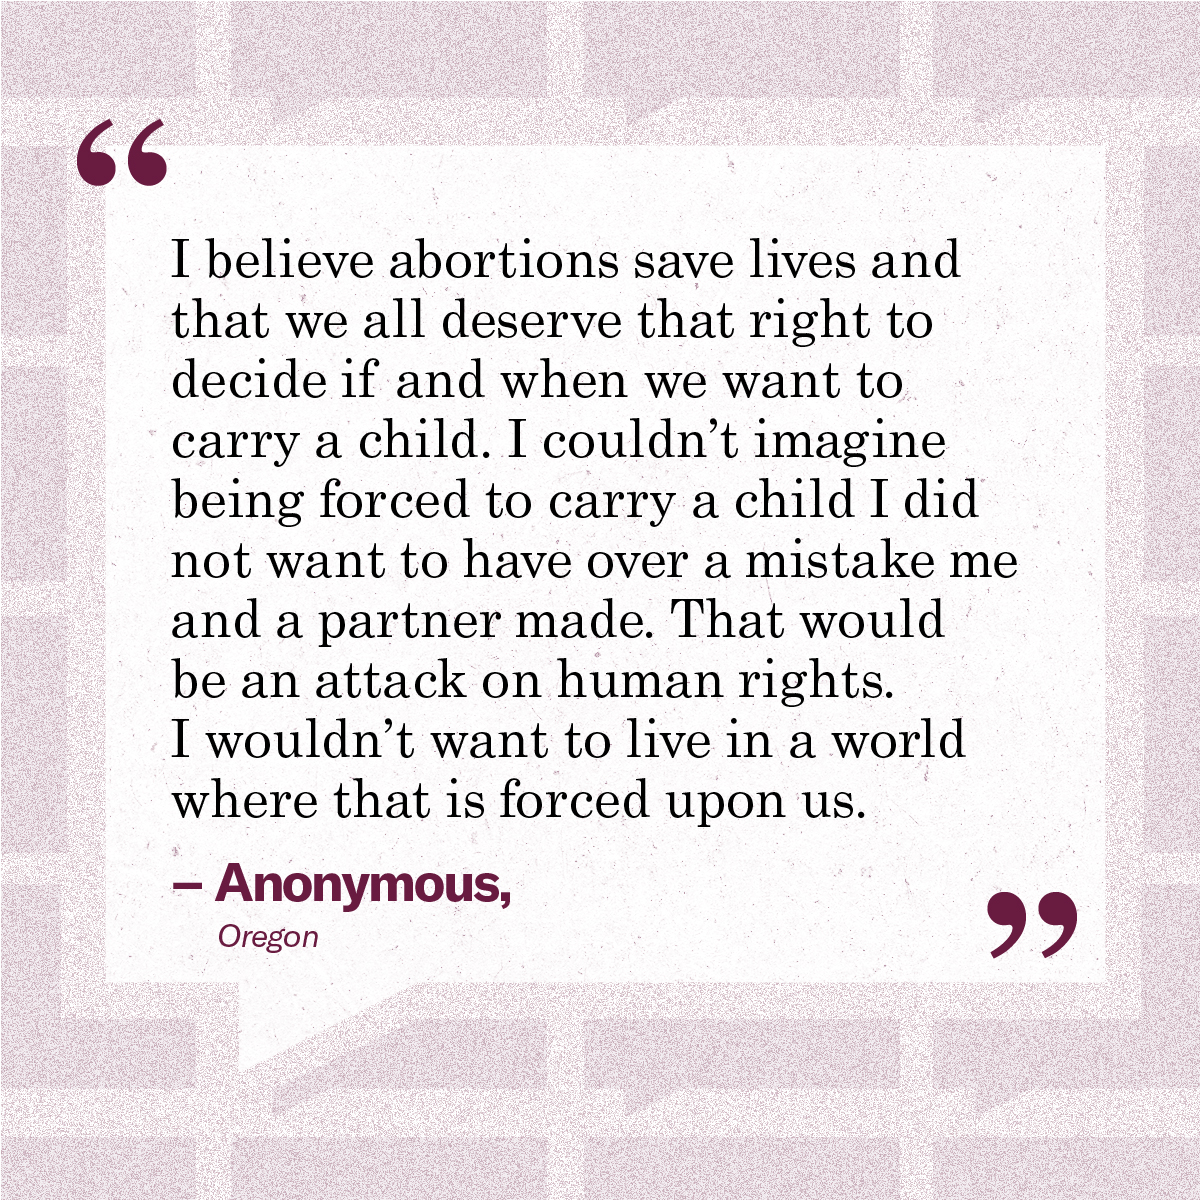 “I believe abortions save lives and that we all deserve that right to decide if and when we want to carry a child. I couldn’t imagine being forced to carry a child I did not want to have over a mistake me and a partner made. That would be an attack on human rights. I wouldn’t want to live in a world where that is forced upon us.” – Anonymous, Oregon